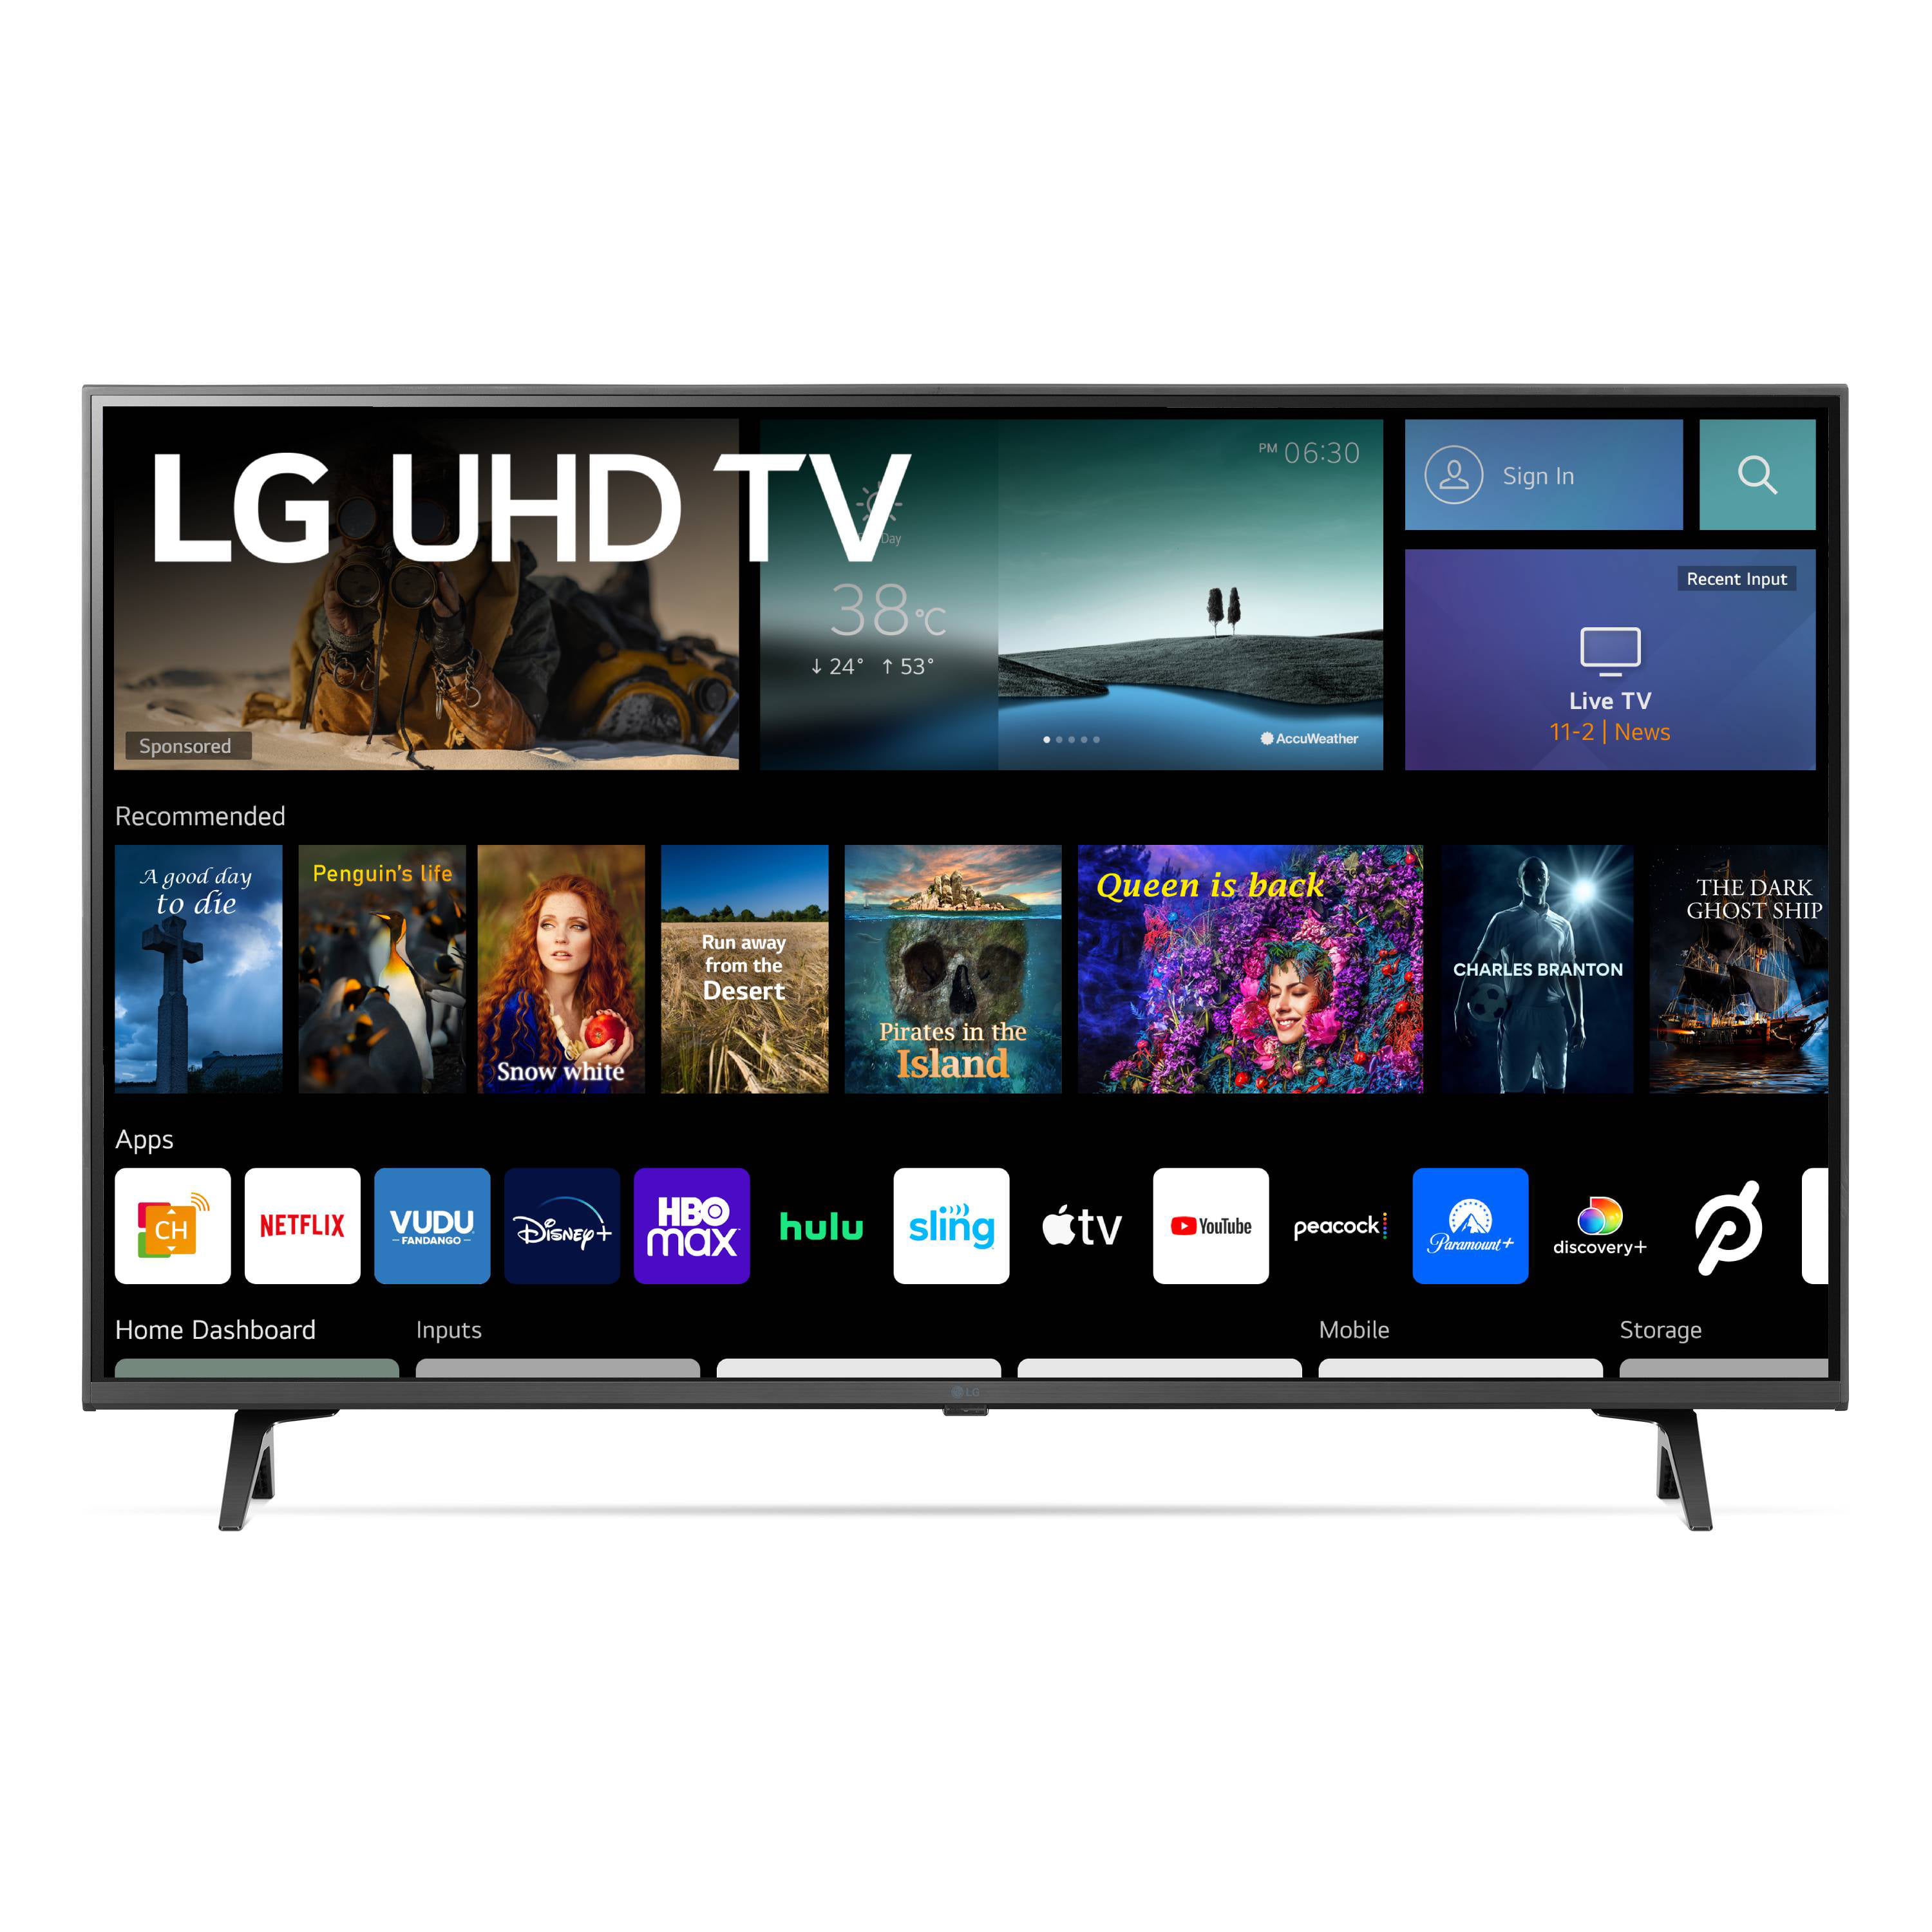 How to Set Up Your LG TV? 9